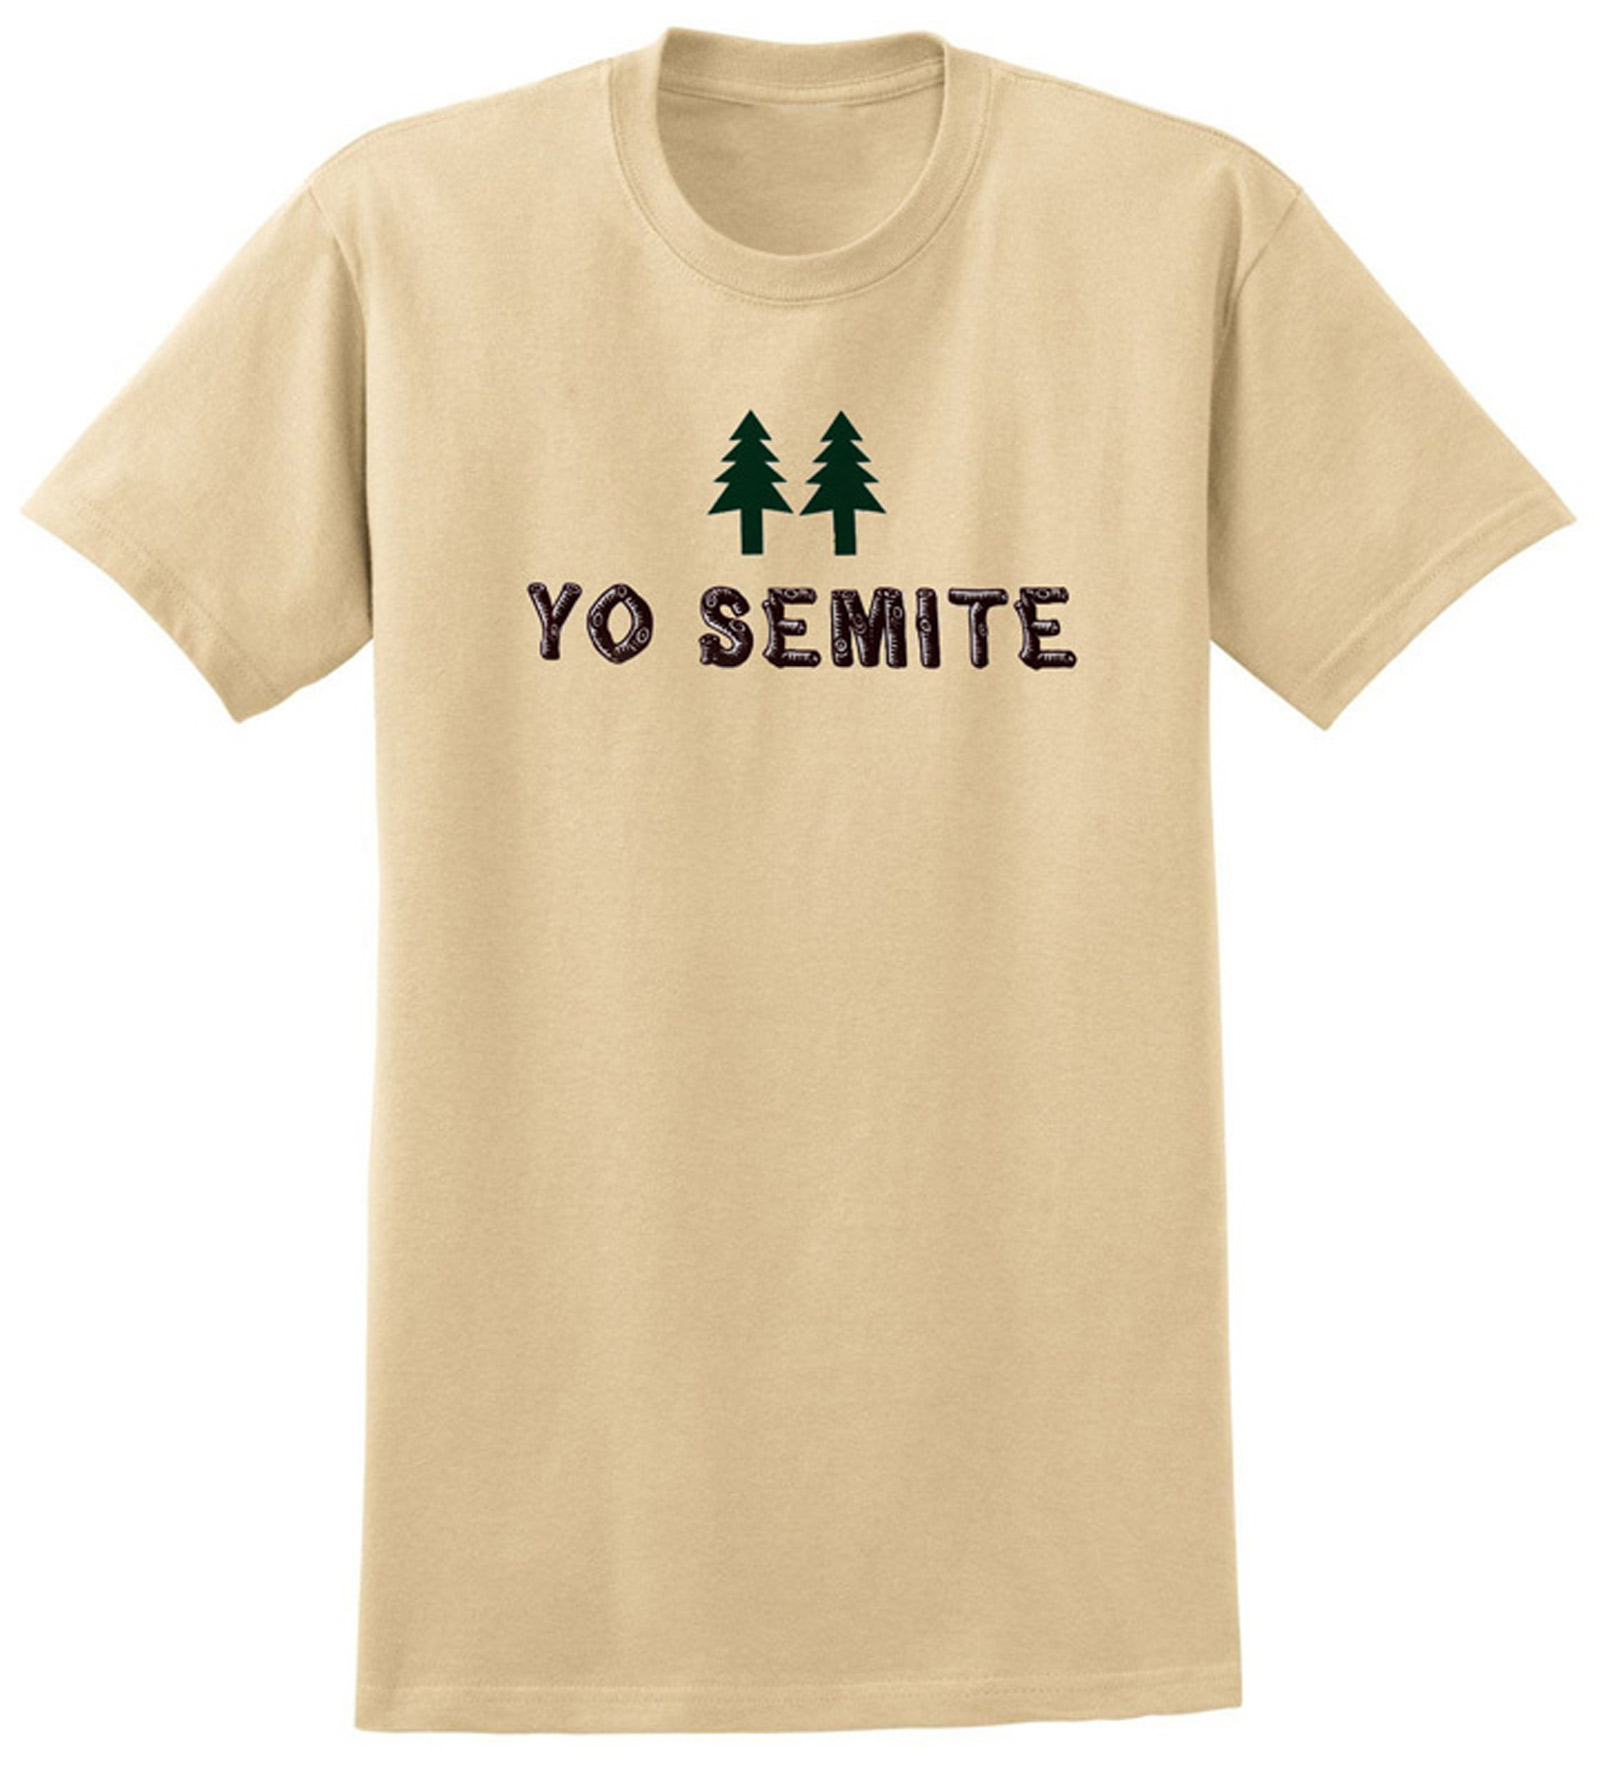 Yo Semite T Shirts Are A Big Hit For One Jewish Museum Following President Trump S Blunder Cnn Travel